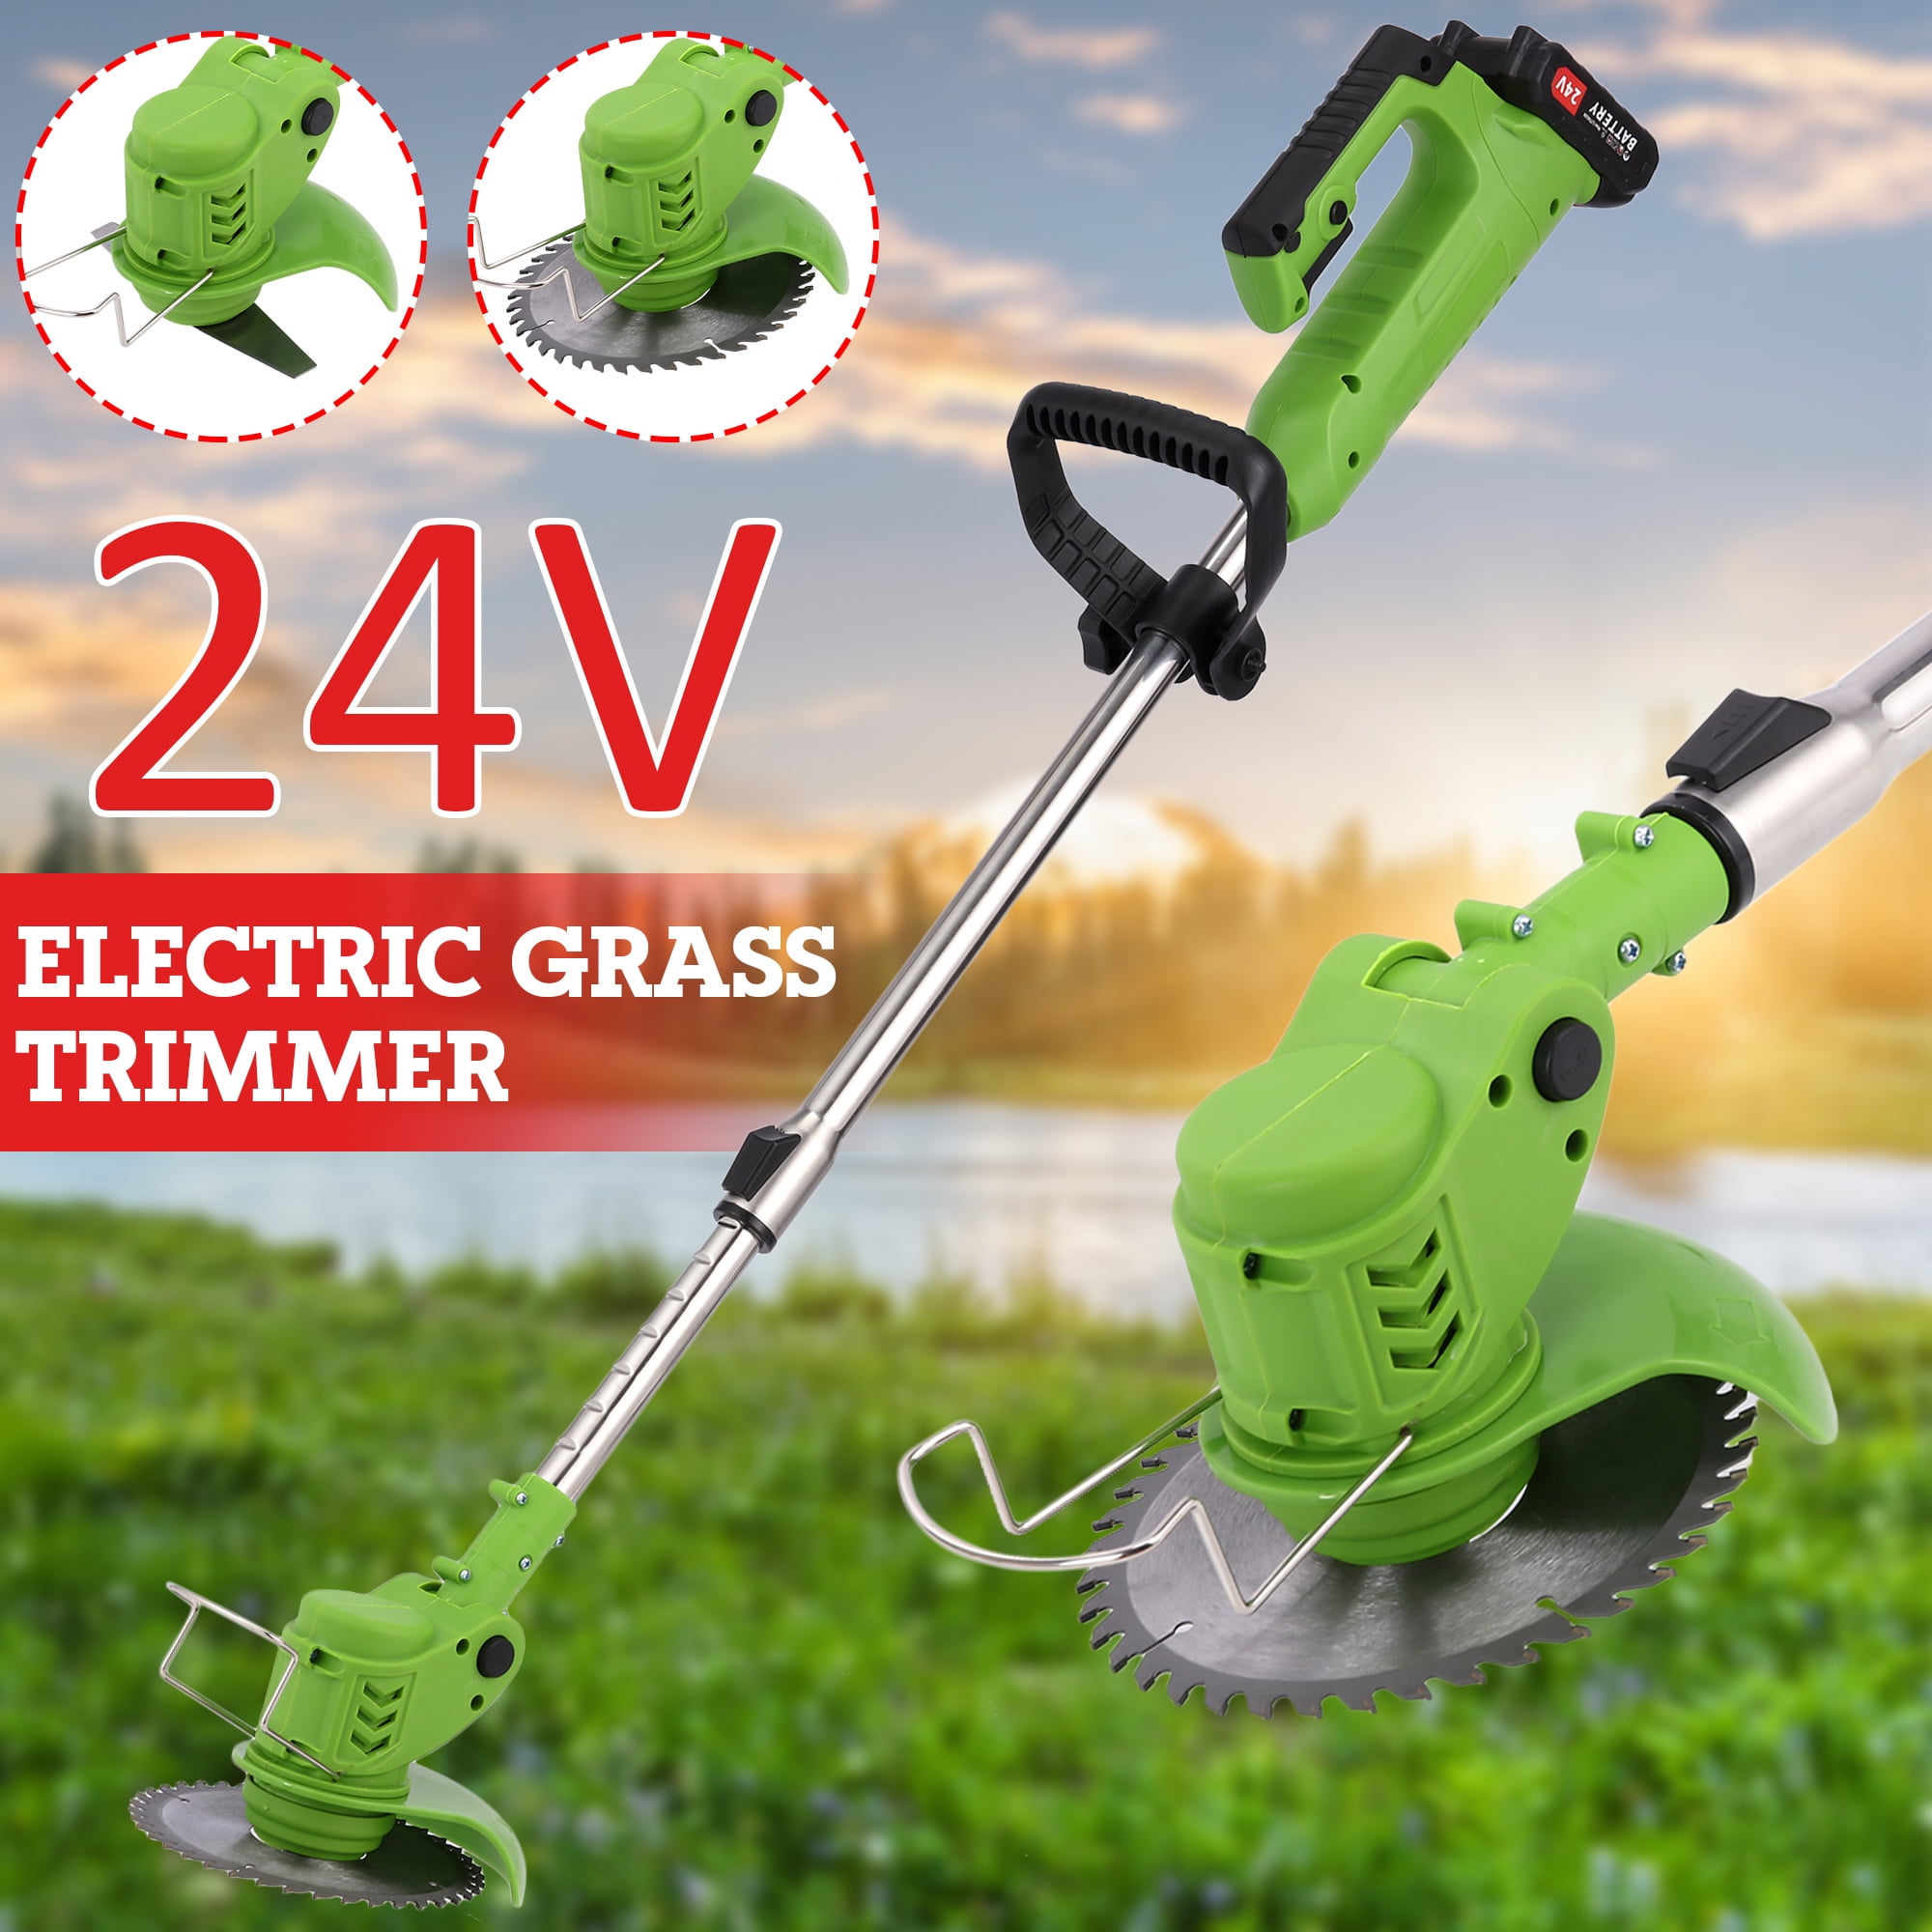 2 Batteries & Charger Included Cordless String Trimmer,Weed Wacker 21V Battery Powered,Weed Eater Suitable for Lawn Trimming/Pruning/Gardening,Grass Trimmer with Telescopic Rod and Adjustable Head 